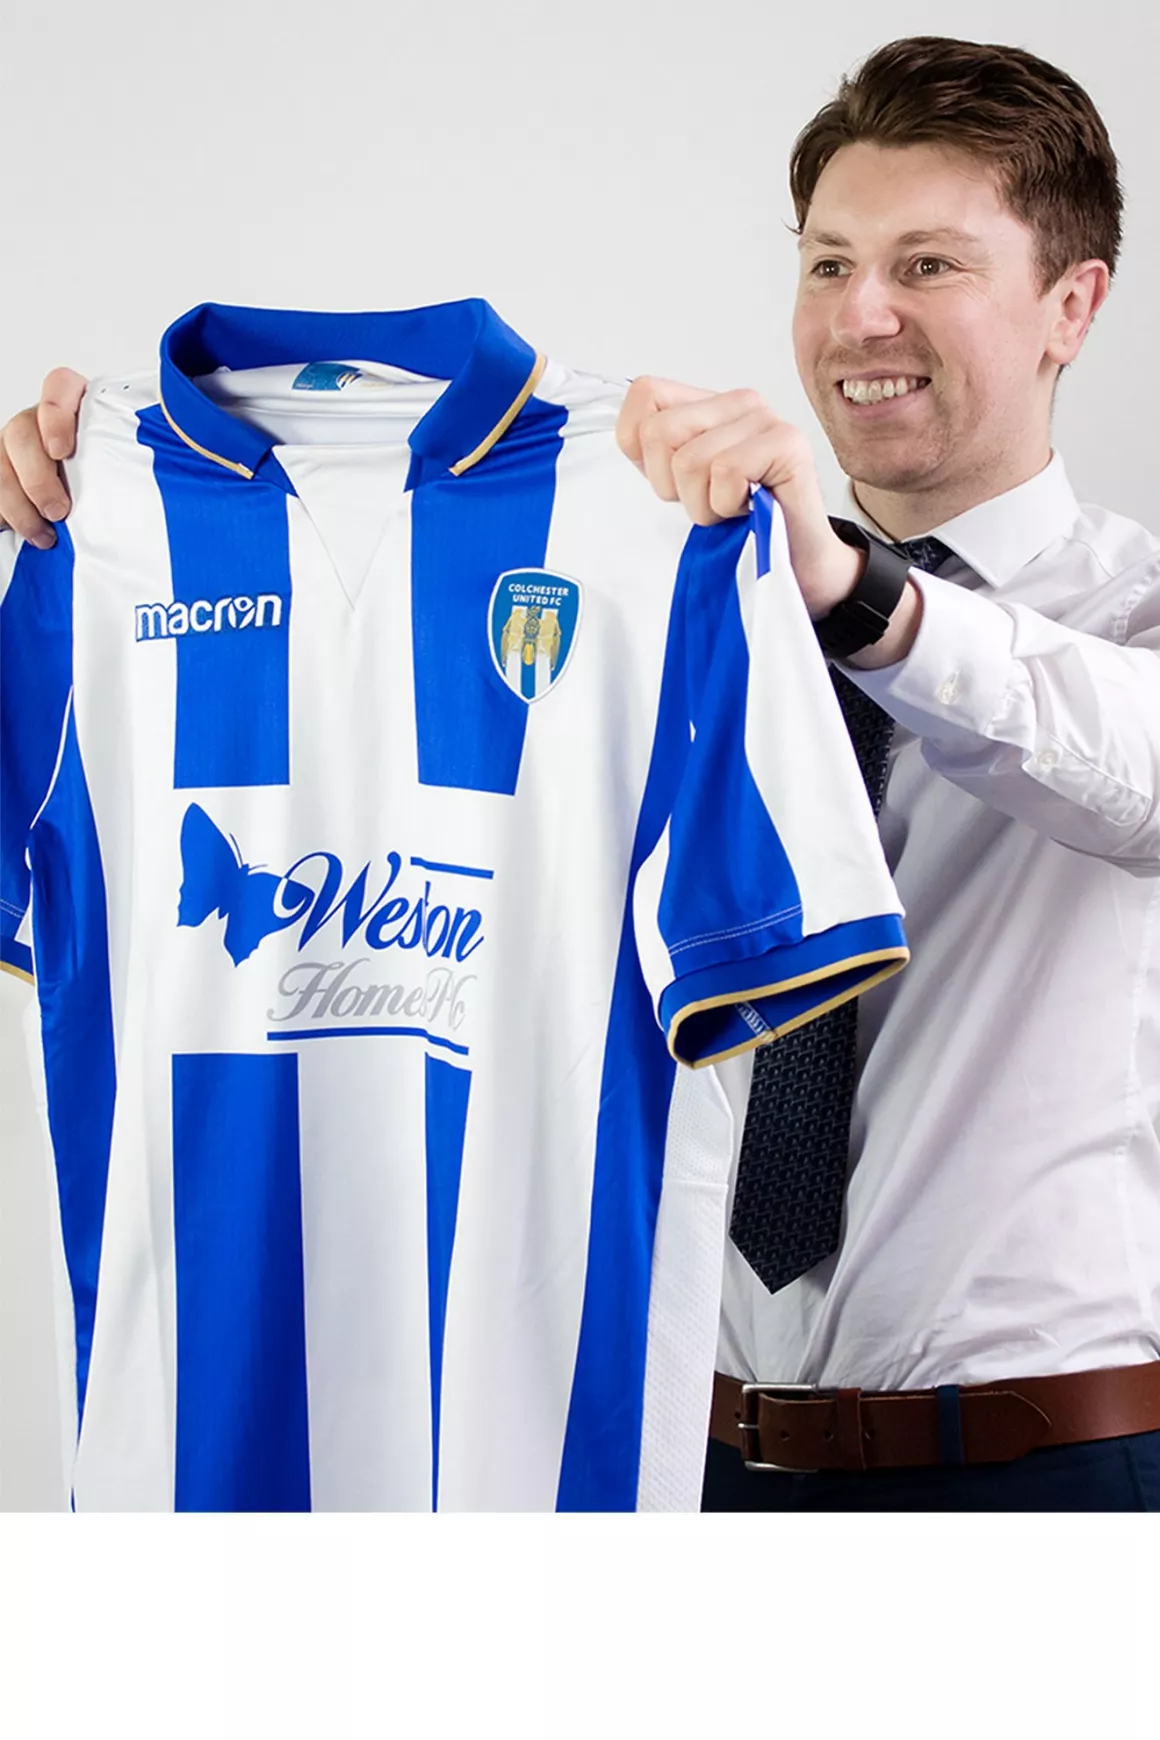 Simon Clark (Senior Consultant) Wearing Shirt and tie, holding a Colchester United Football Top